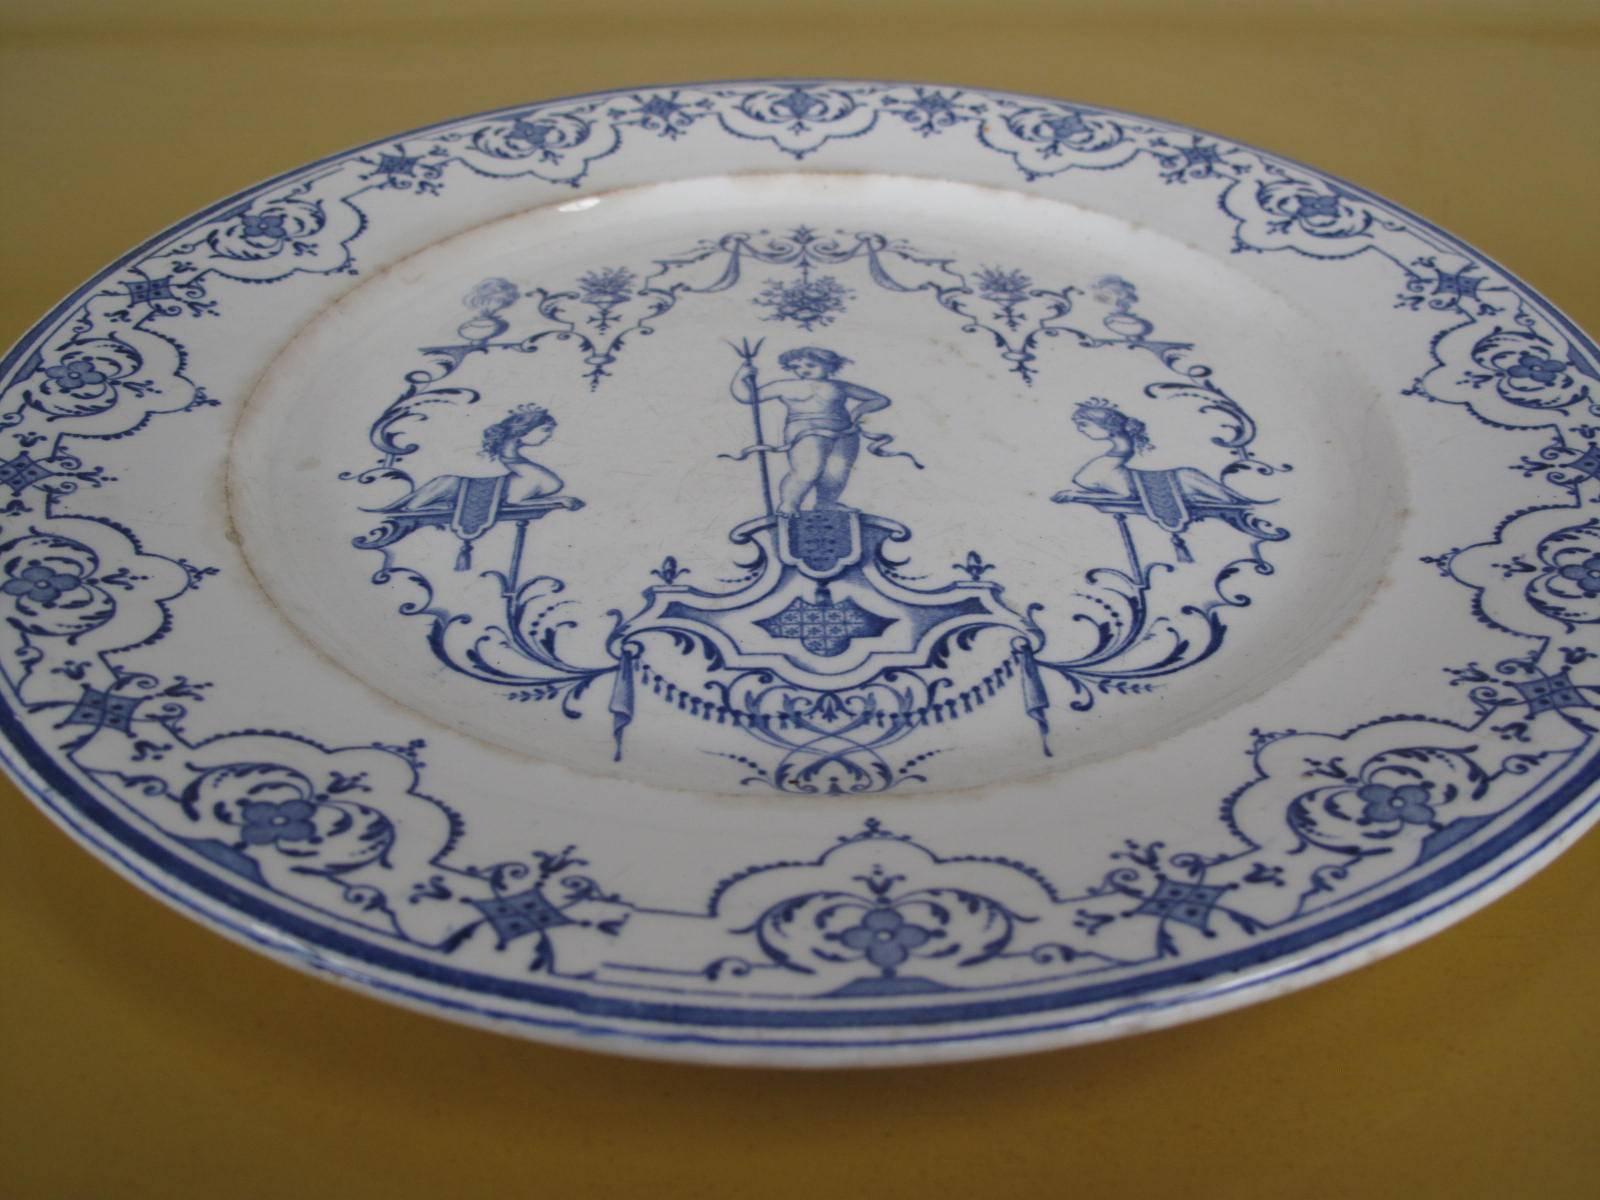 Clerissy faience platter. Early 1700s blue and white tin glazed earthenware. Decorations inspired by the engraver Jean Berain The Elder (1638-1711). Marked "Moustiers" with the distinctive date mark on underside as shown. 

From the